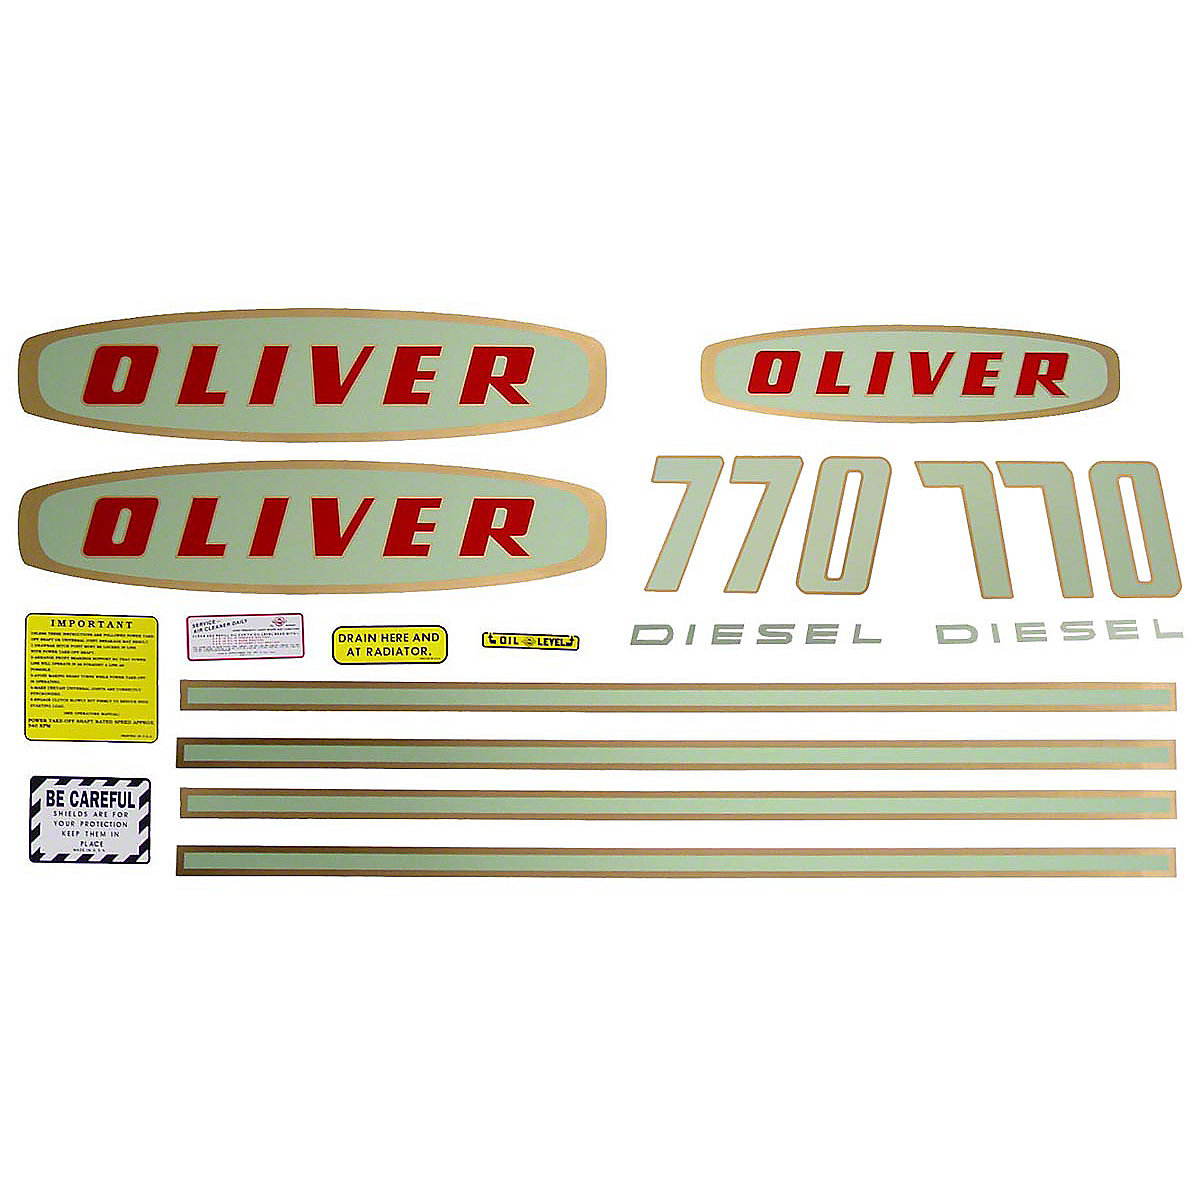 Mylar Decal Set For Oliver 770 Diesel Tractors. Up to SN#: 112250.